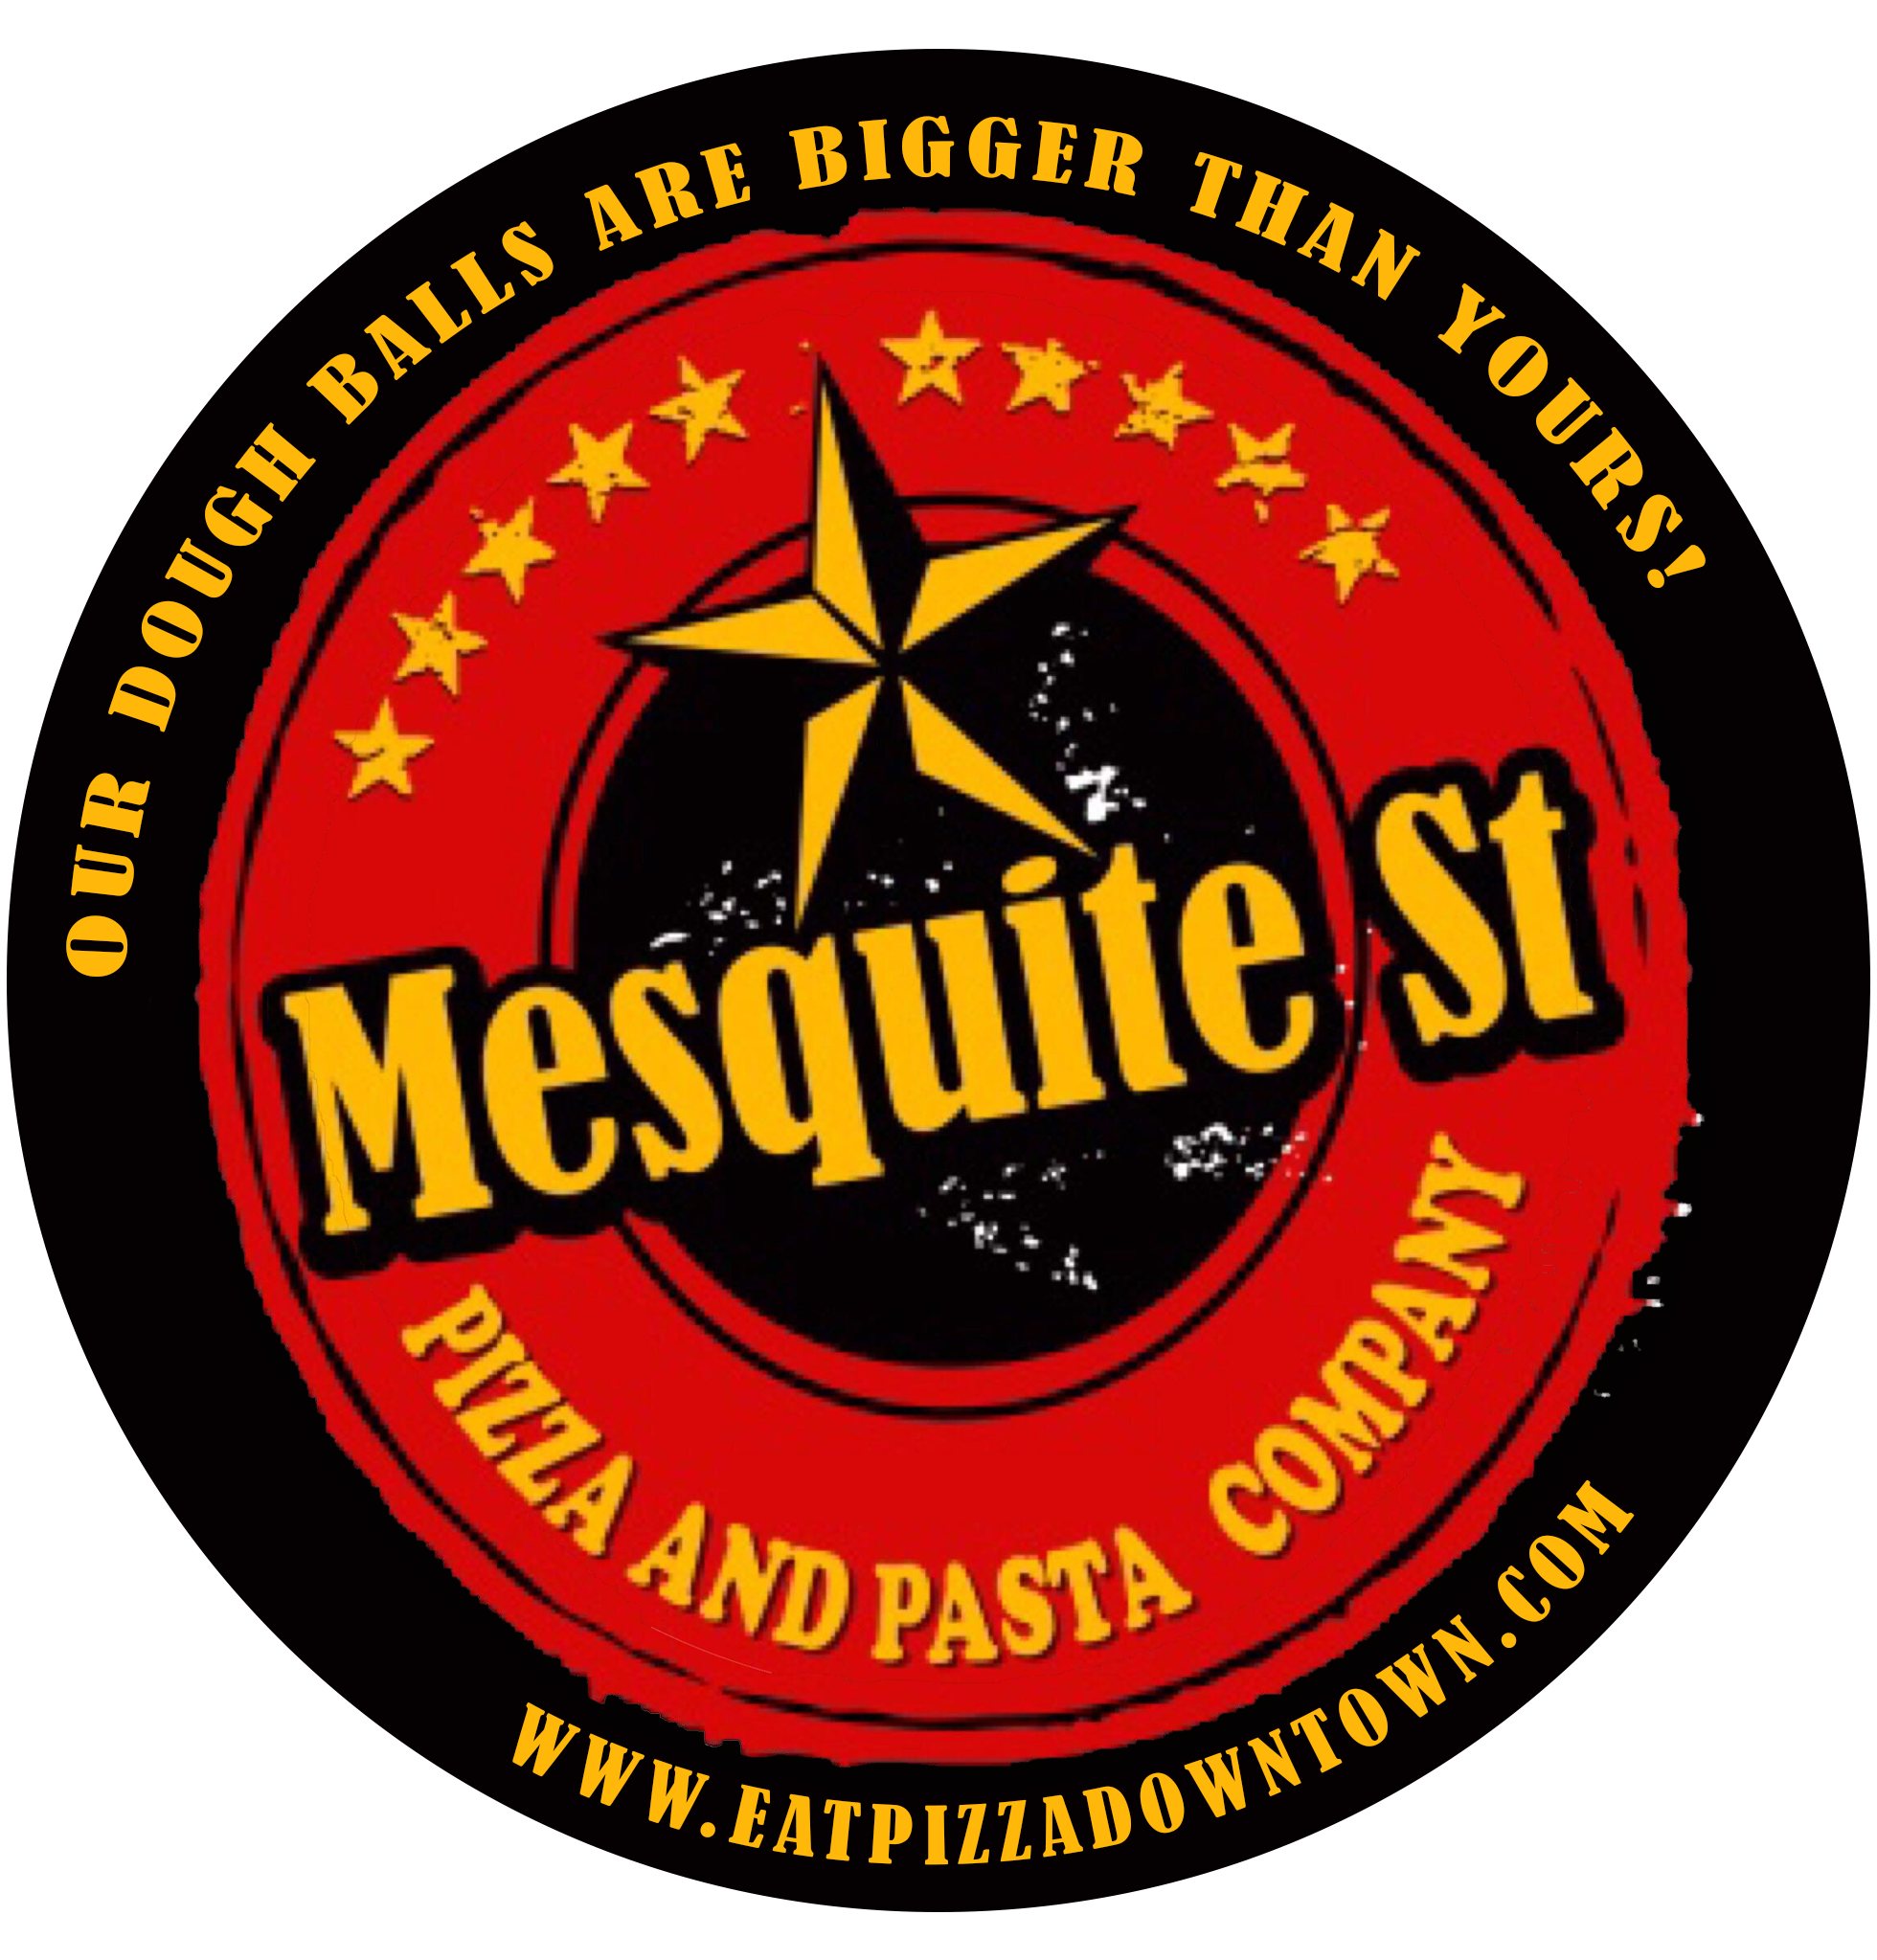 Mesquite St. Pizza And Pasta Company